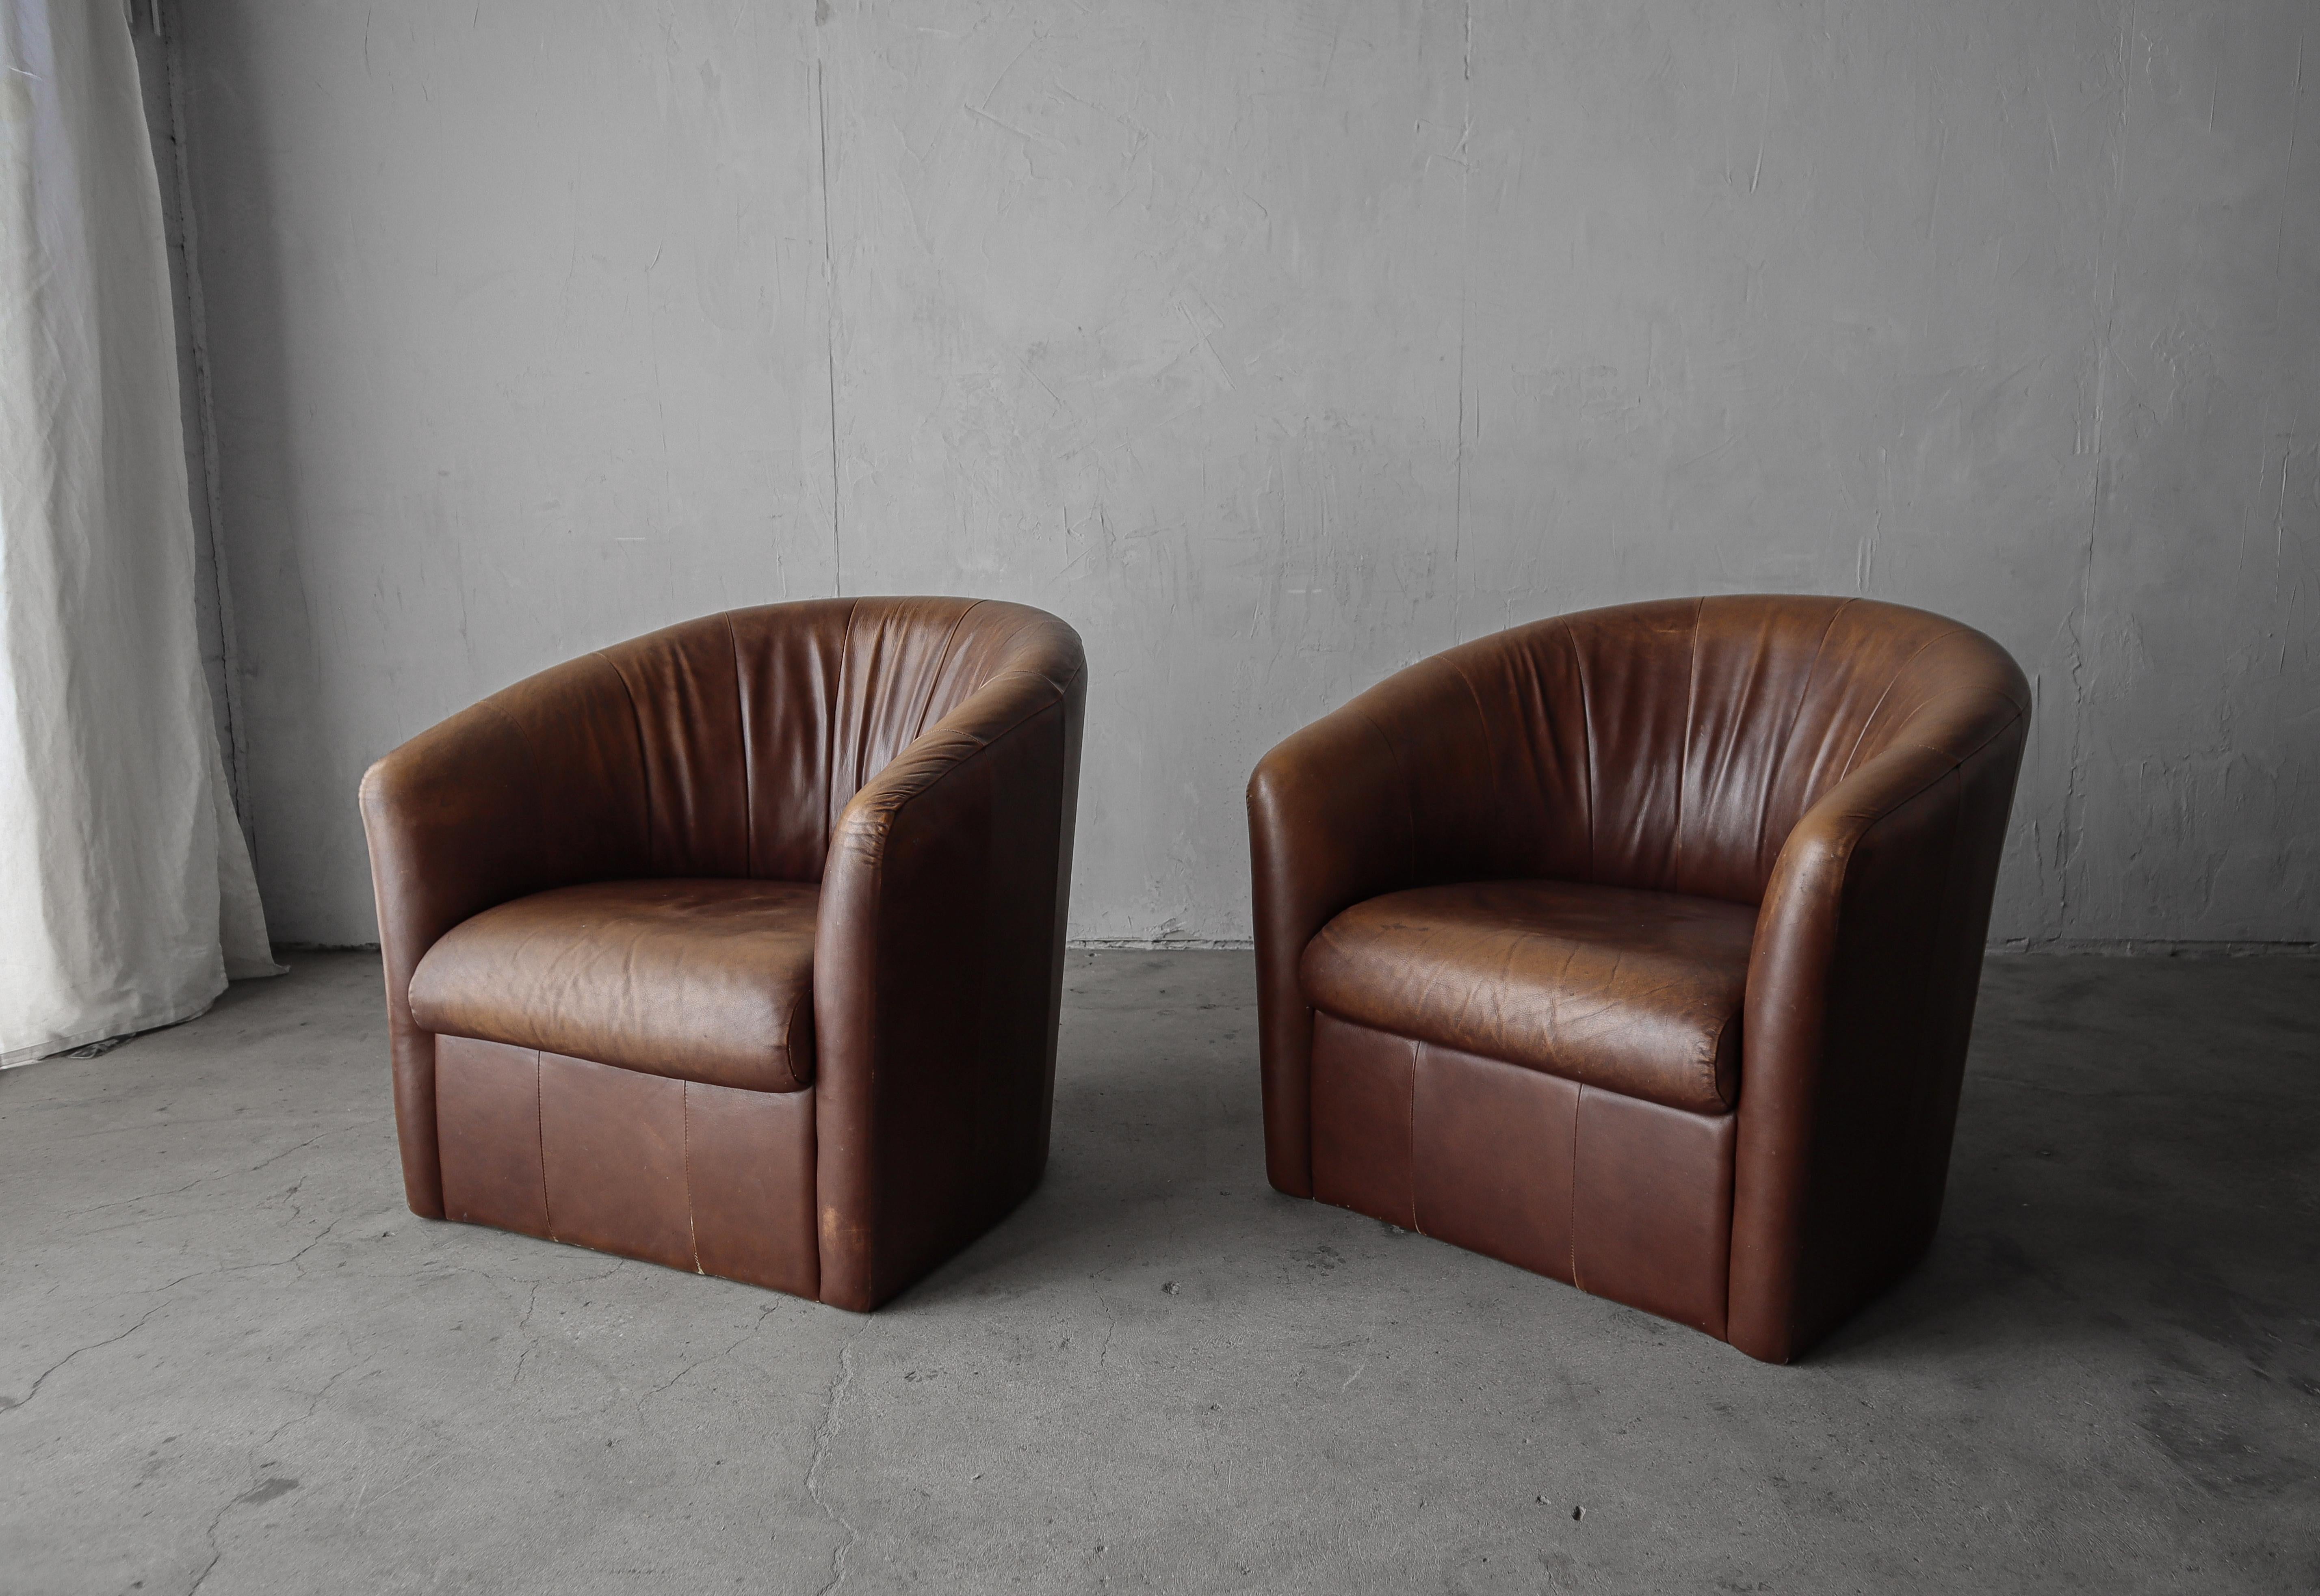 20th Century Vintage Patinated Leather Lounge Chairs For Sale